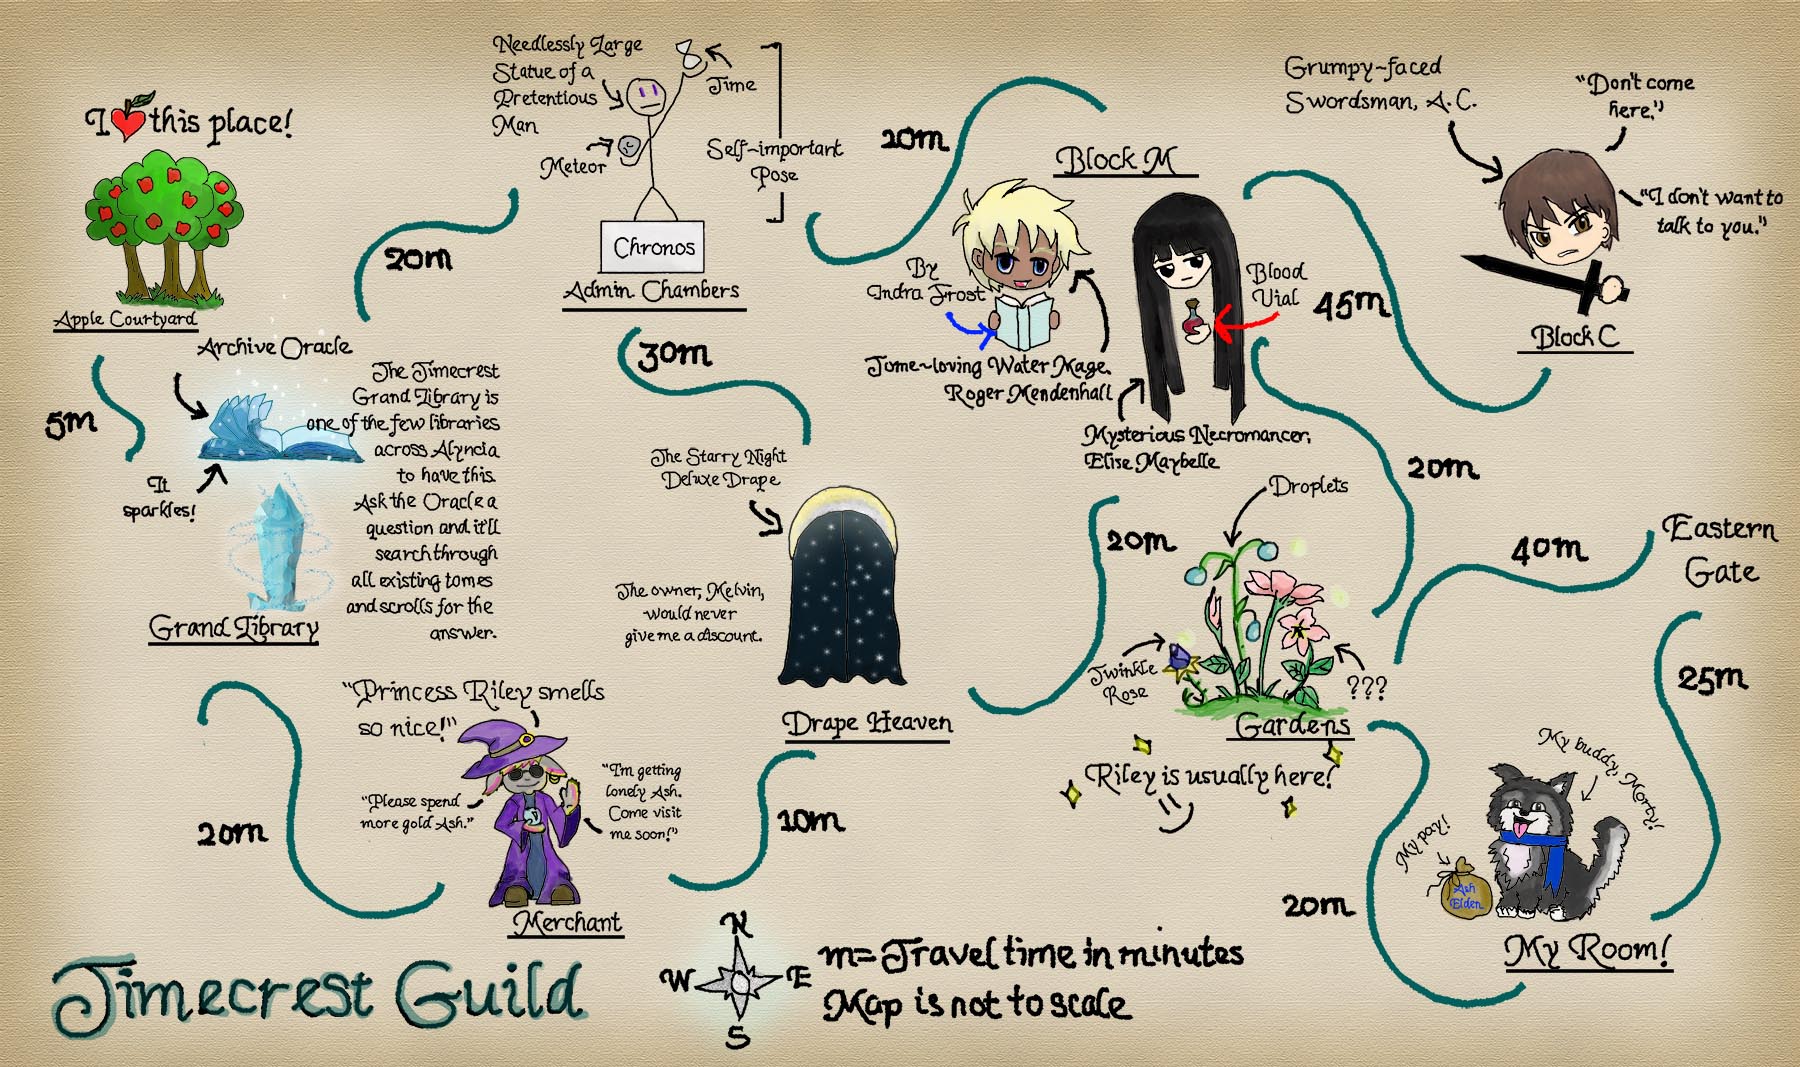 A map of Timecrest Guild hand-drawn by Ash. You can see many locations such as the Apple Courtyward, the Grand Library, the Timecrest Merchant, or even the Administration Chambers.